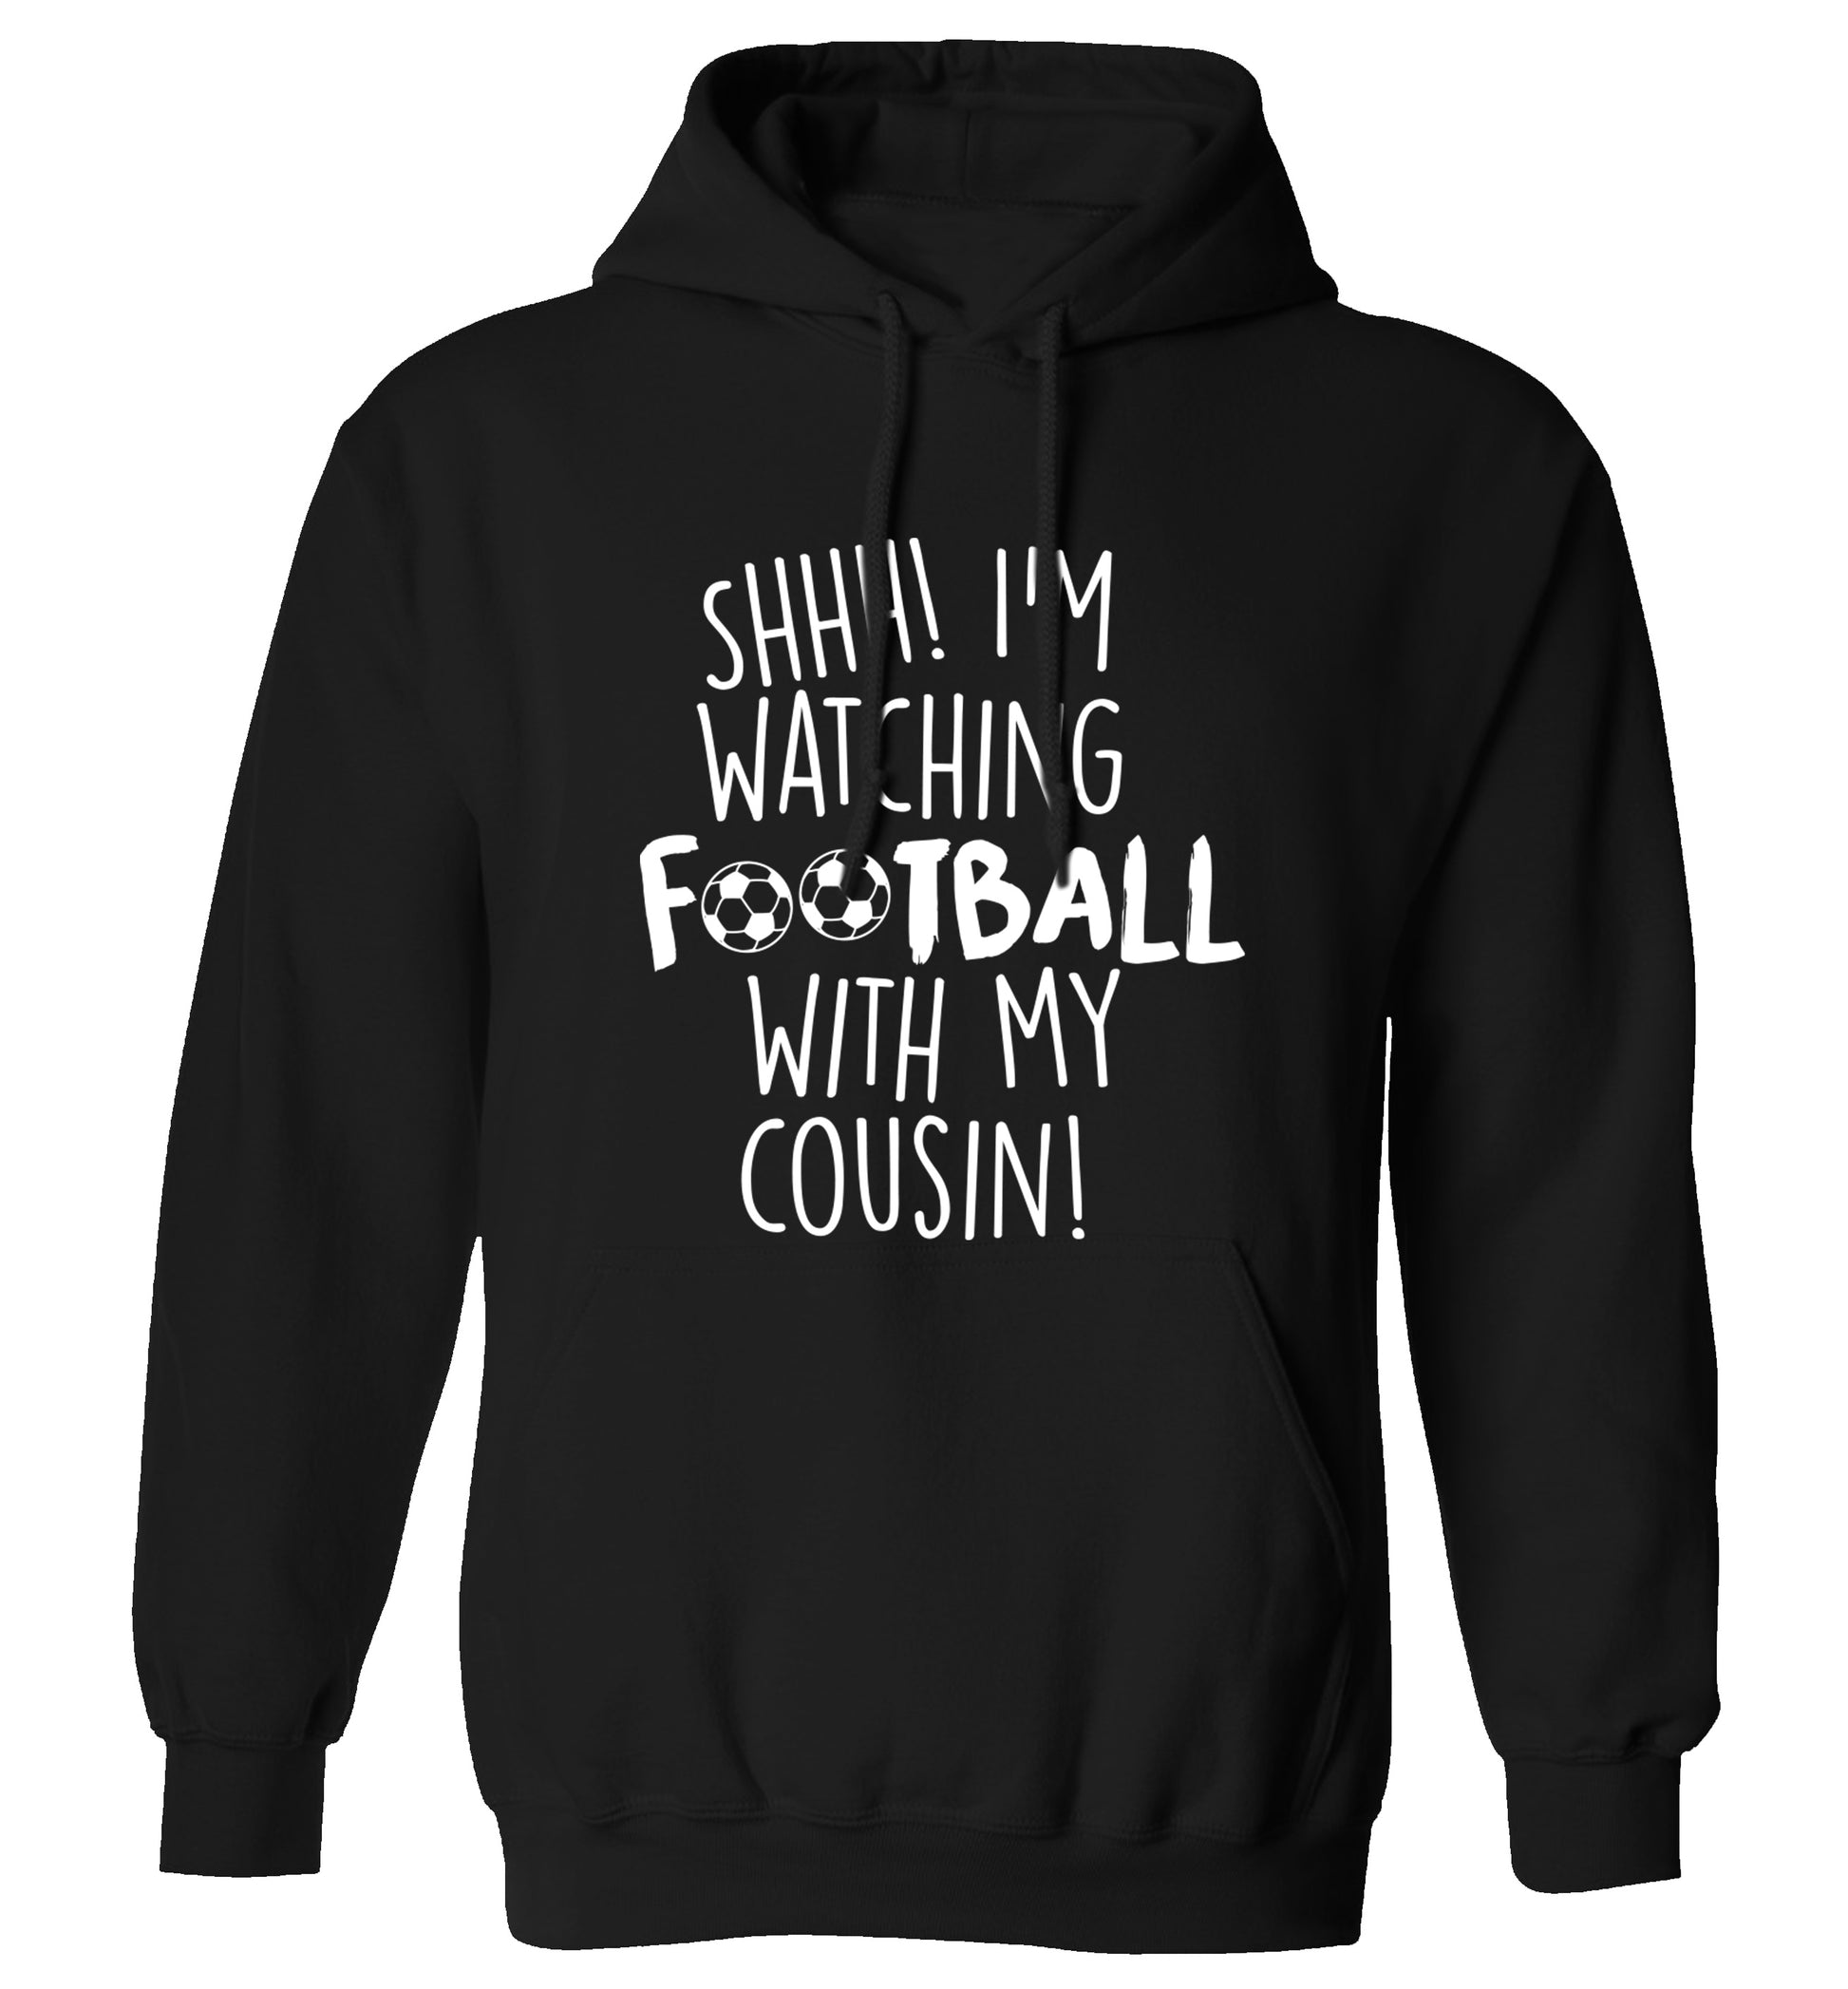 Shhh I'm watching football with my cousin adults unisexblack hoodie 2XL